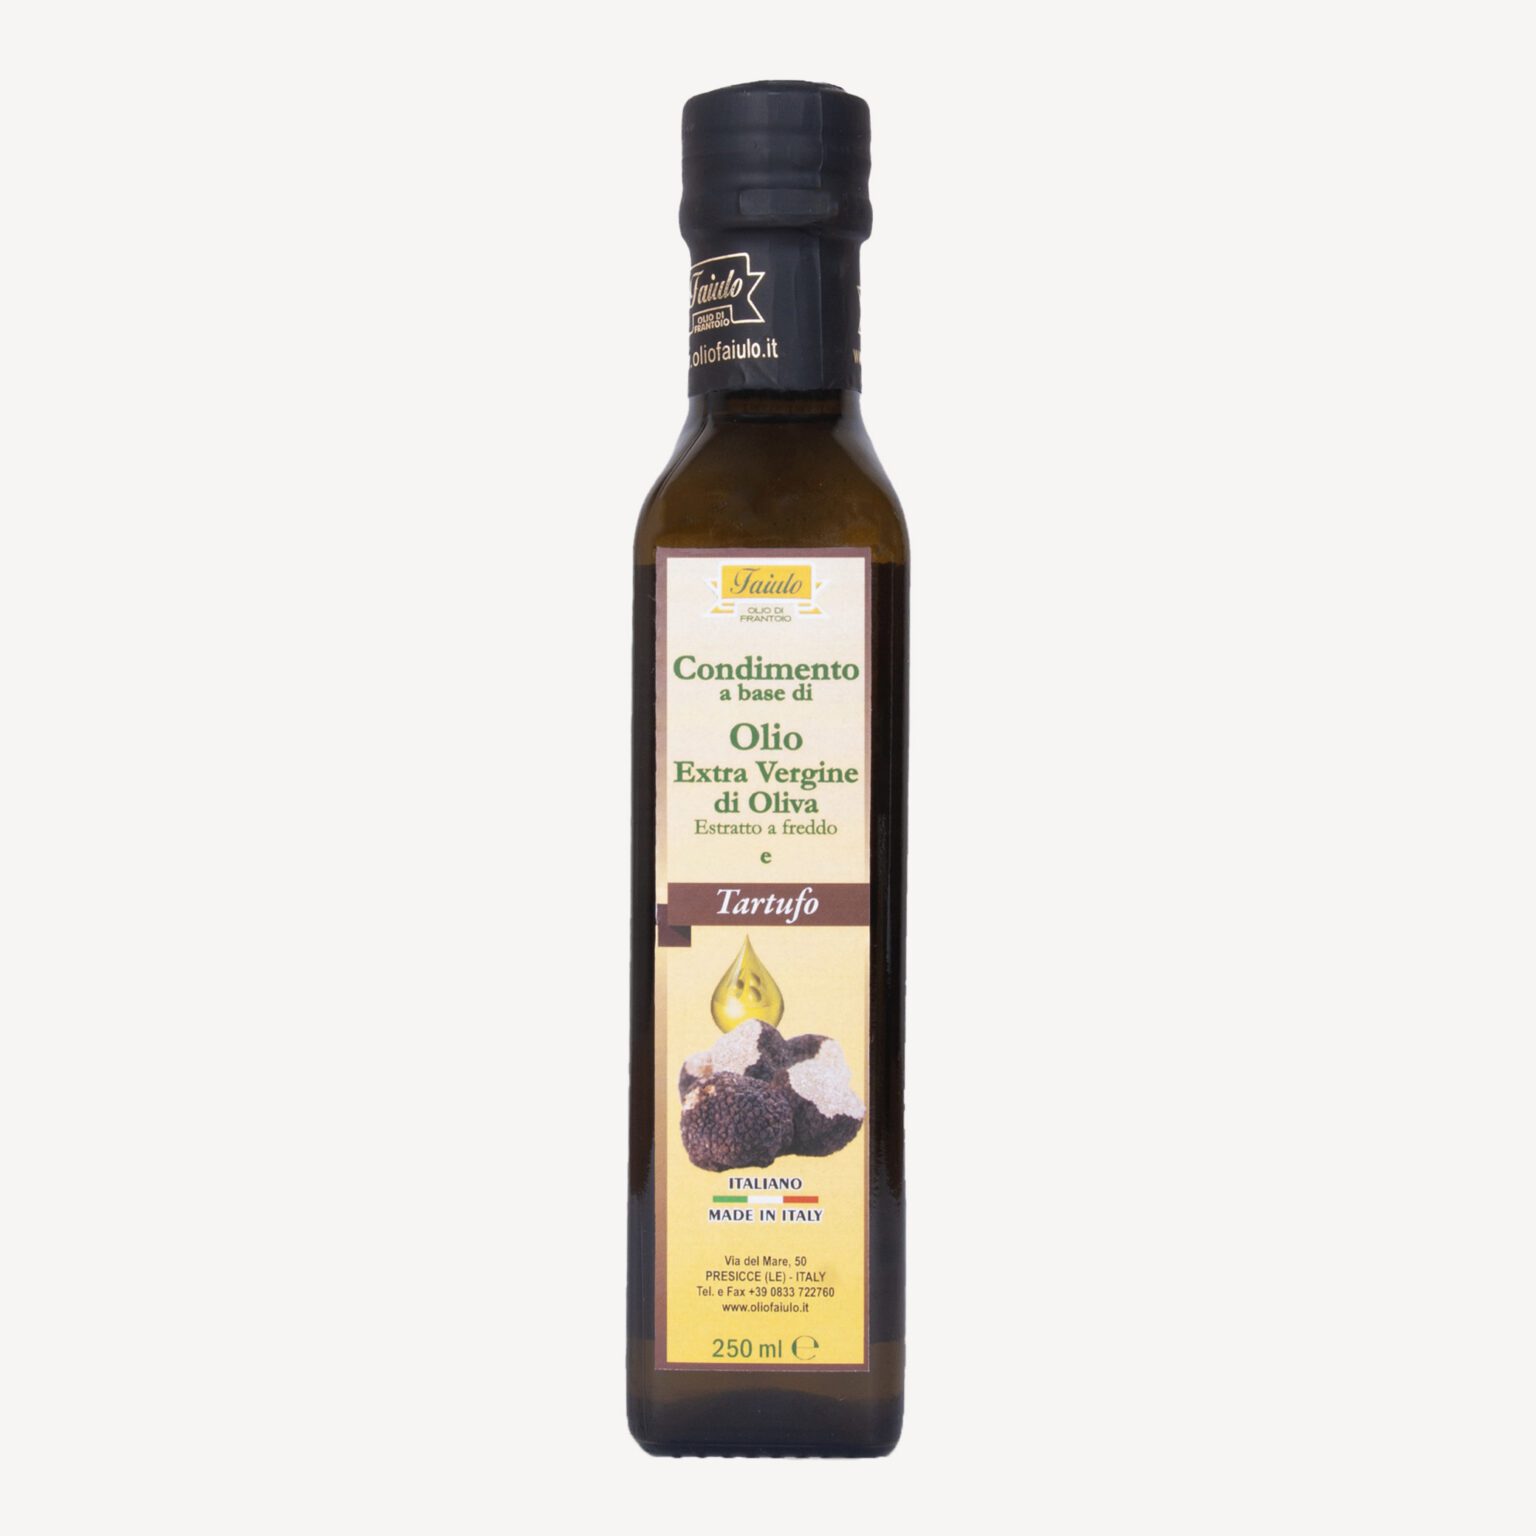 Extra virgin olive oil | handmade products from Puglia | Tre Gioie